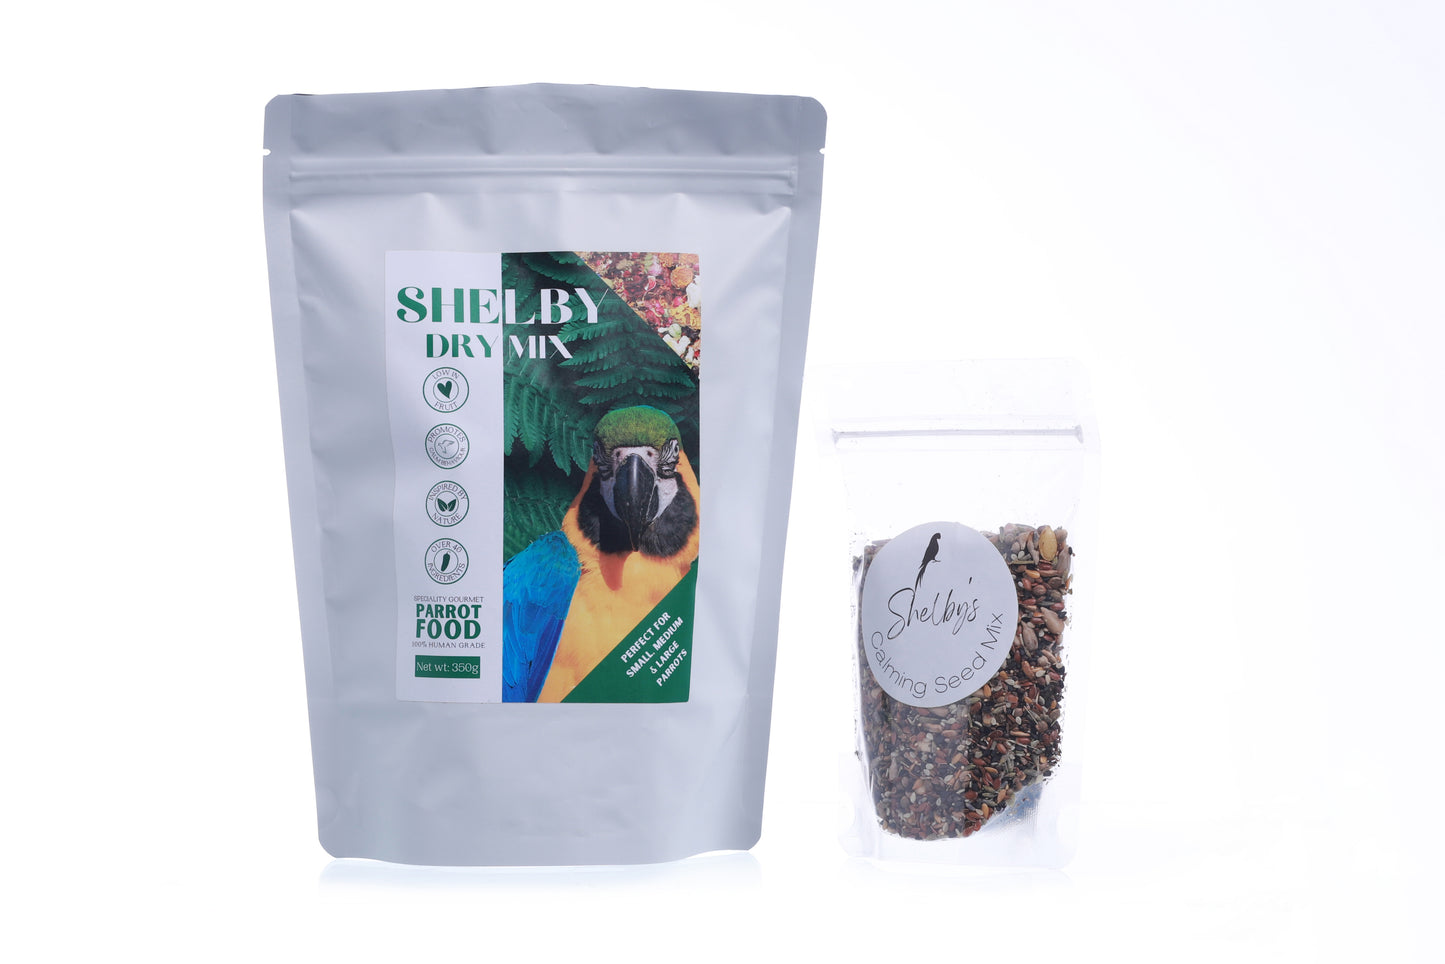 Shelby Dry Mix Gourmet Parrot Food